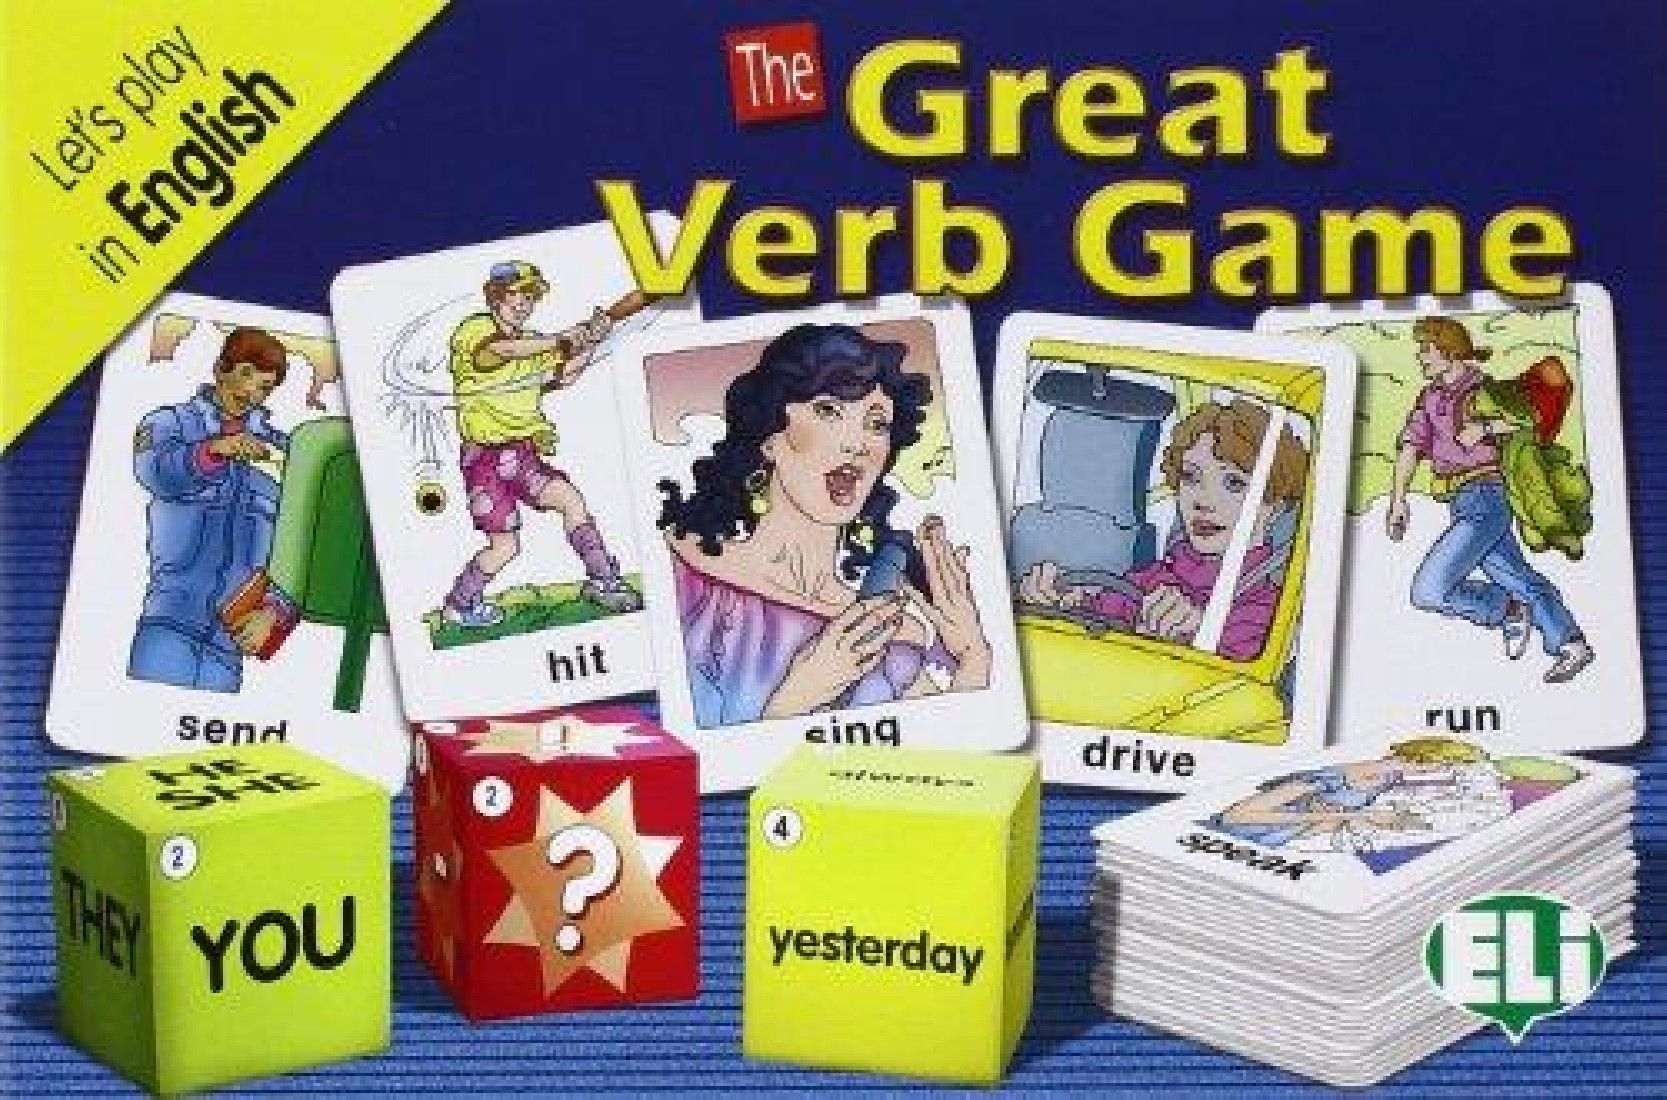 THE GREAT VERB GAME